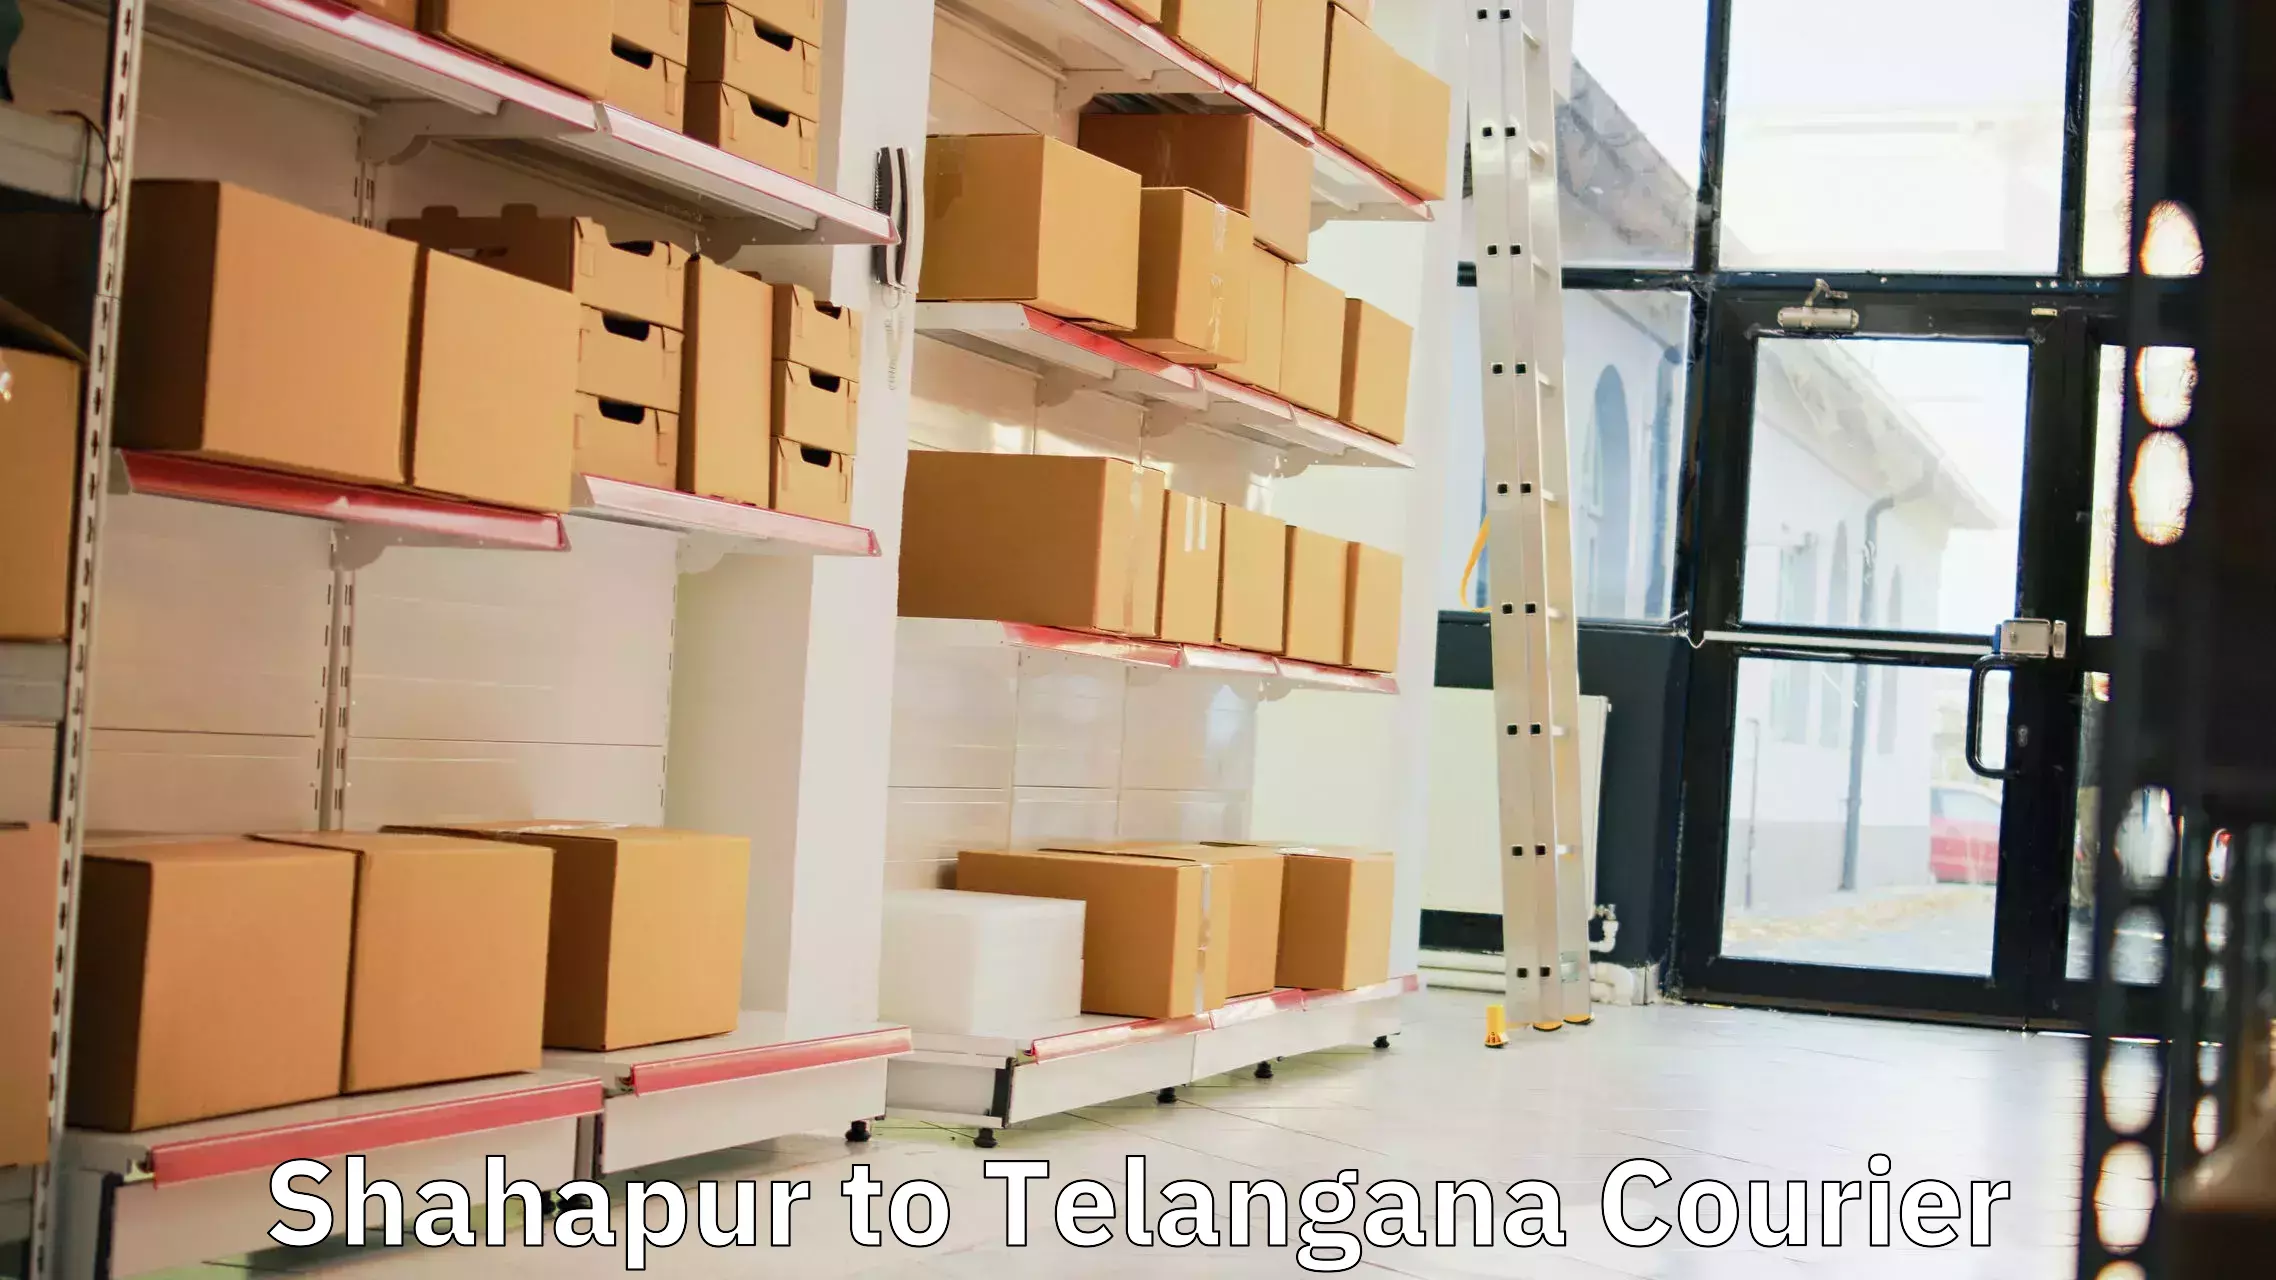 Global courier networks Shahapur to Bhainsa